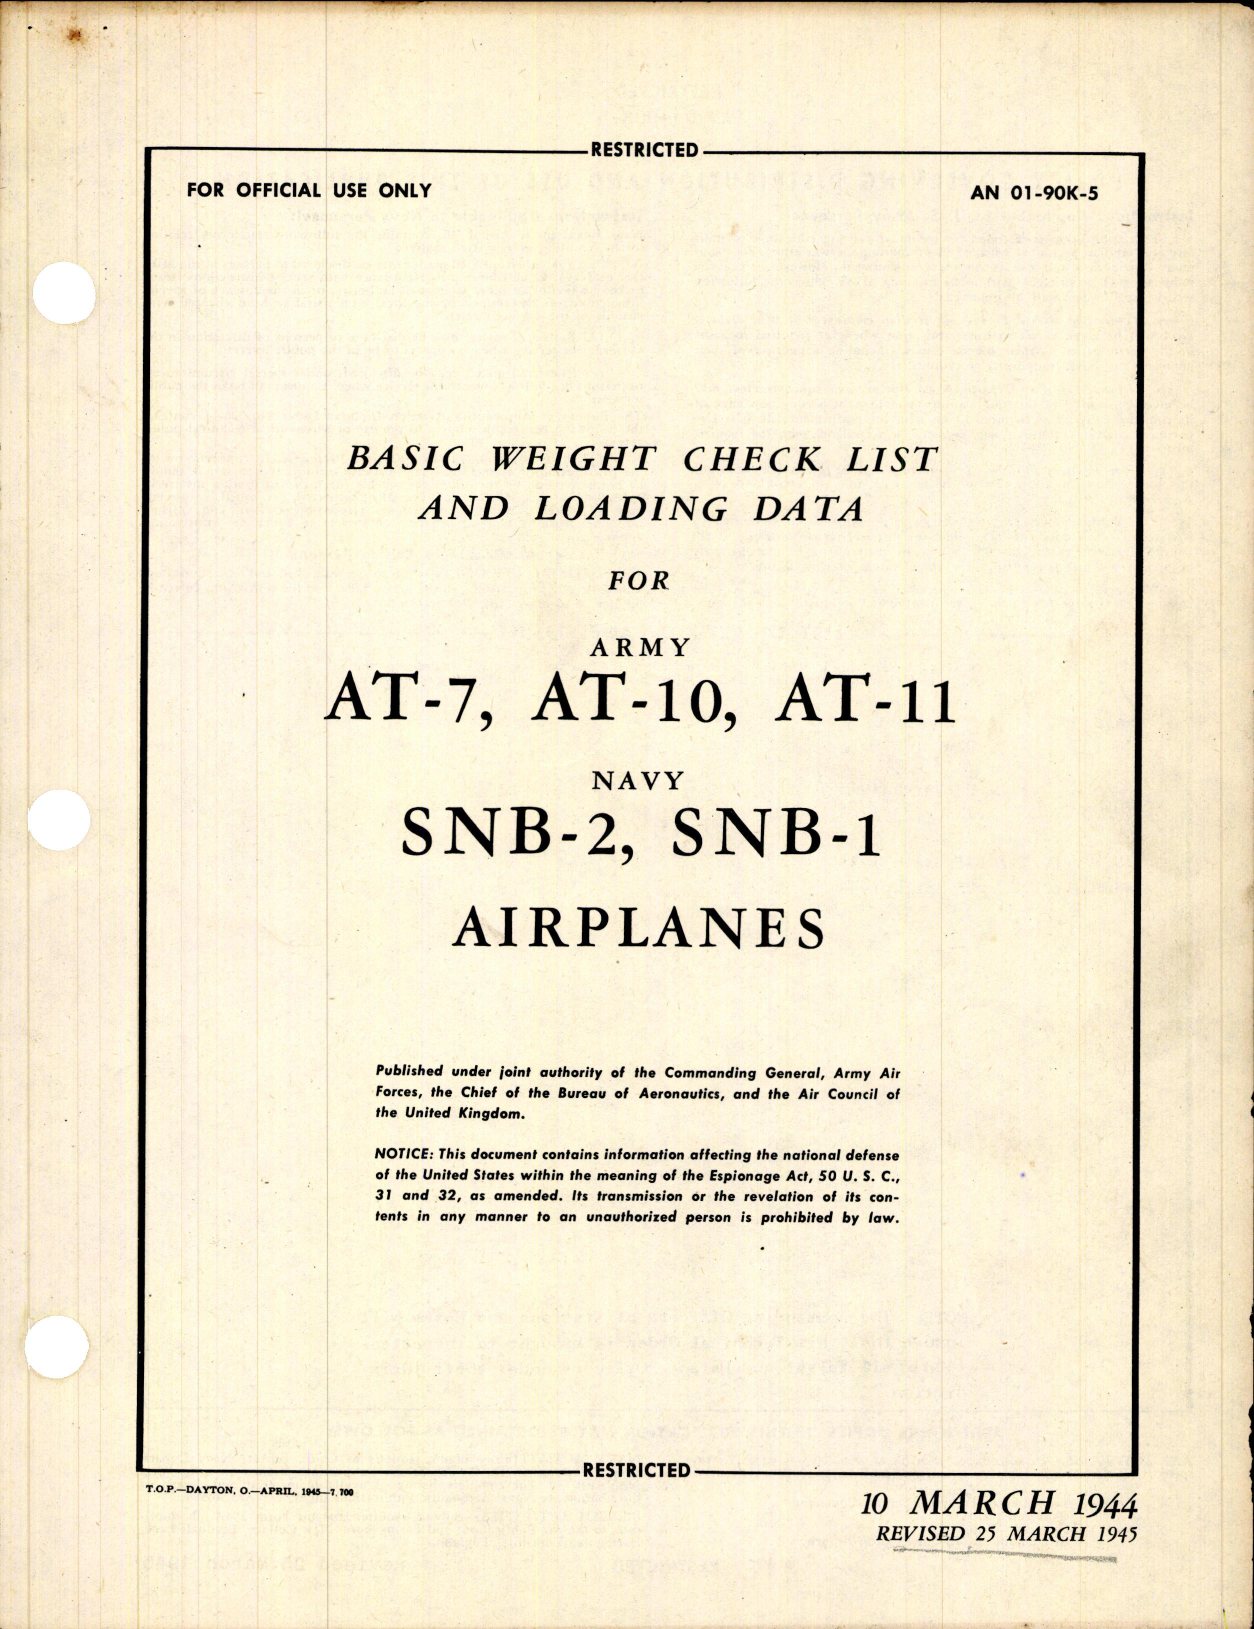 Sample page 1 from AirCorps Library document: Basic Weight Check List & Loading Data for AT-7, AT-10, AT-11, SNB-1, and SNB-2 Airplanes